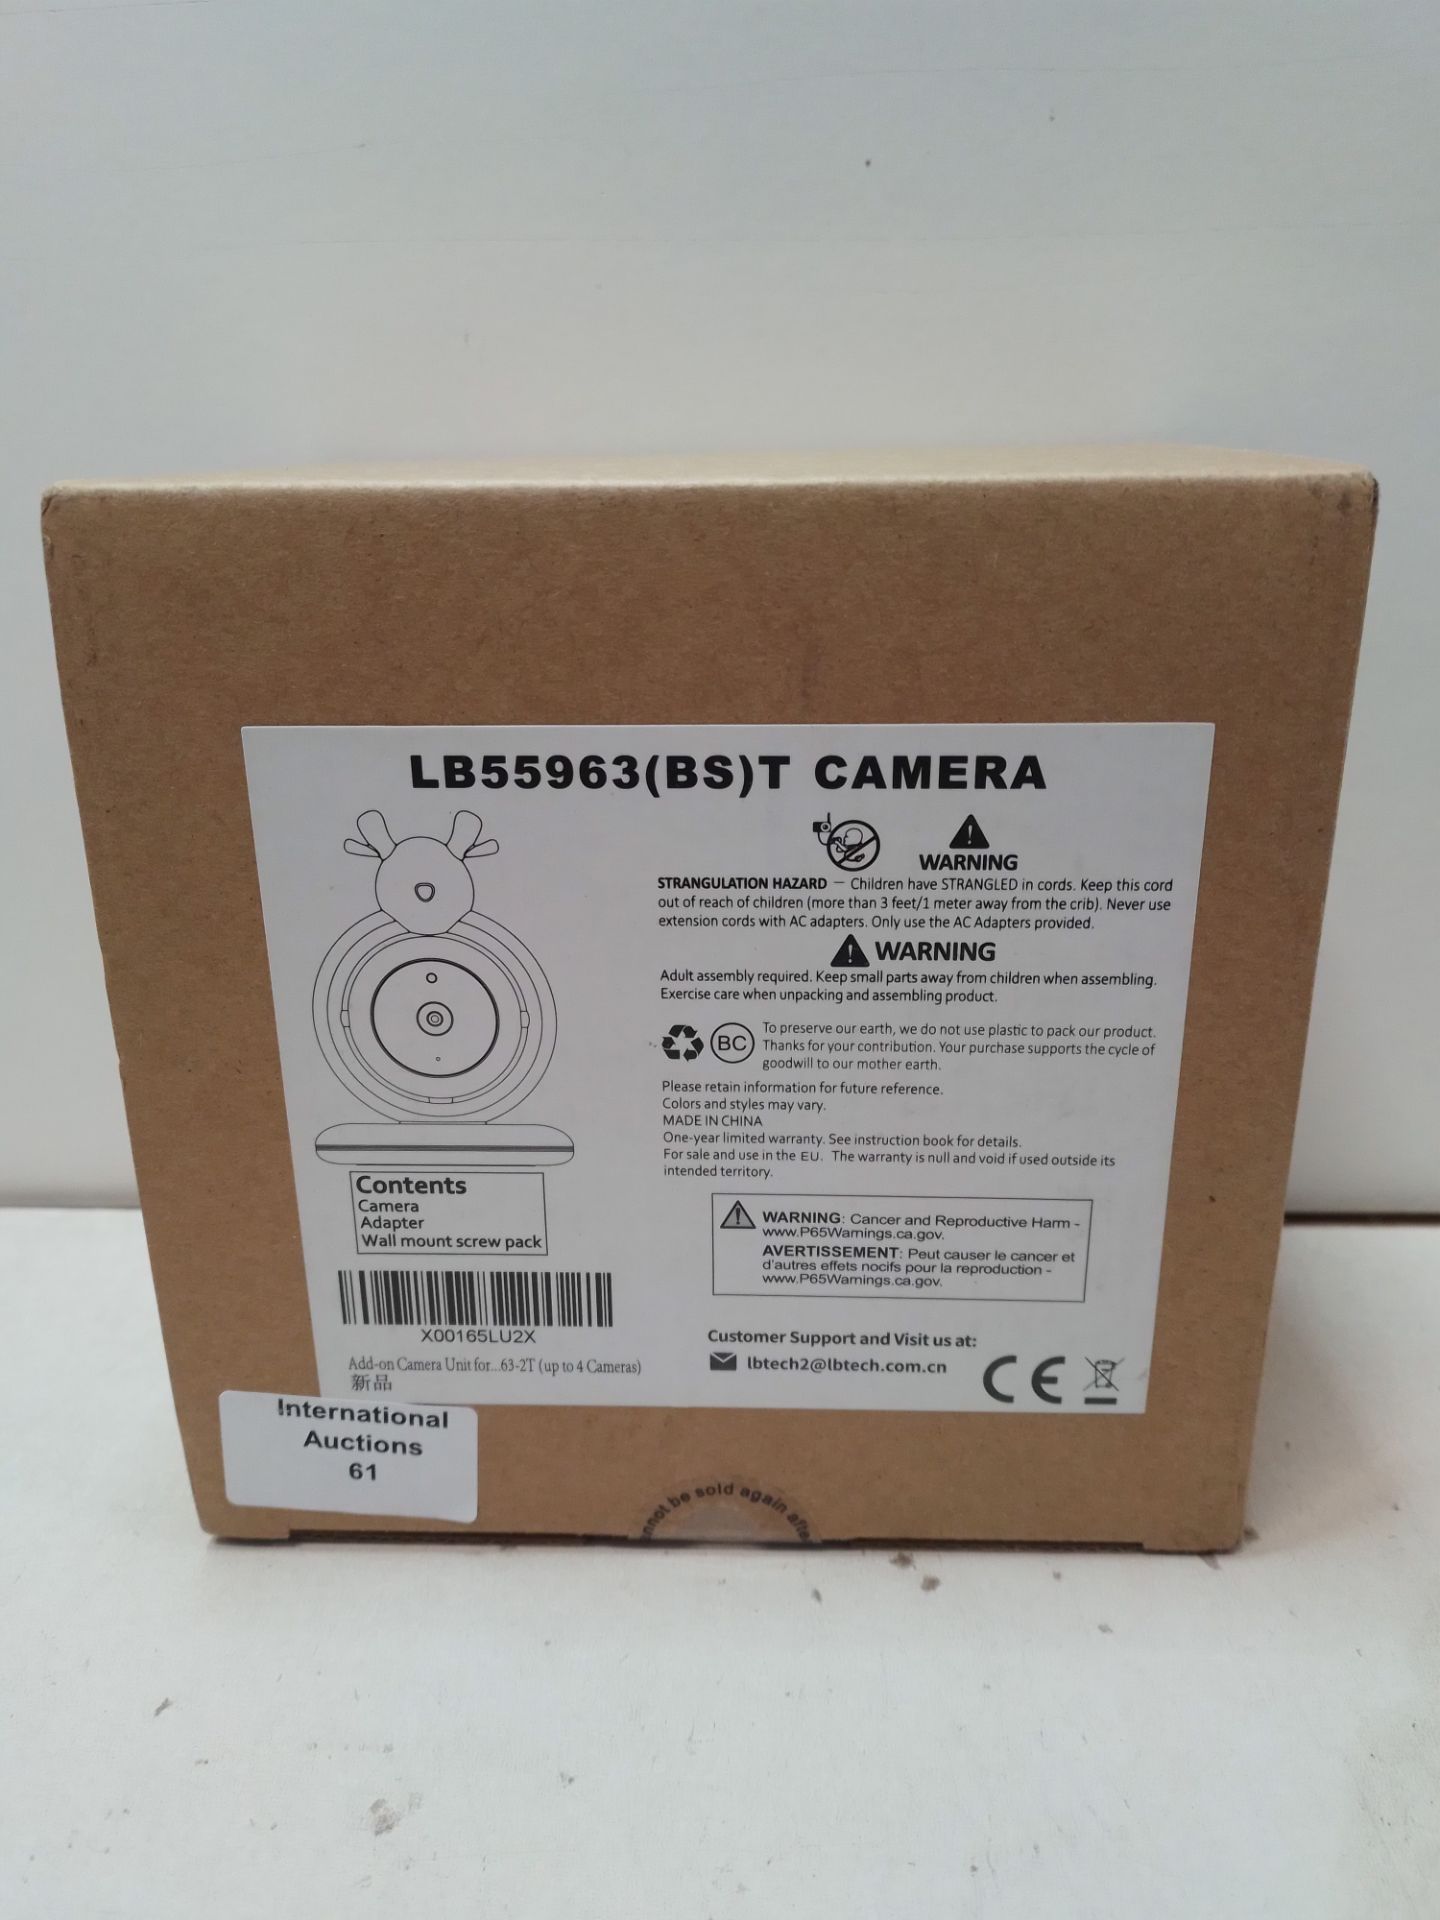 RRP £20.03 Add-on Camera Unit for JSLBtech Video Baby Monitor LB55963-1T - Image 2 of 2